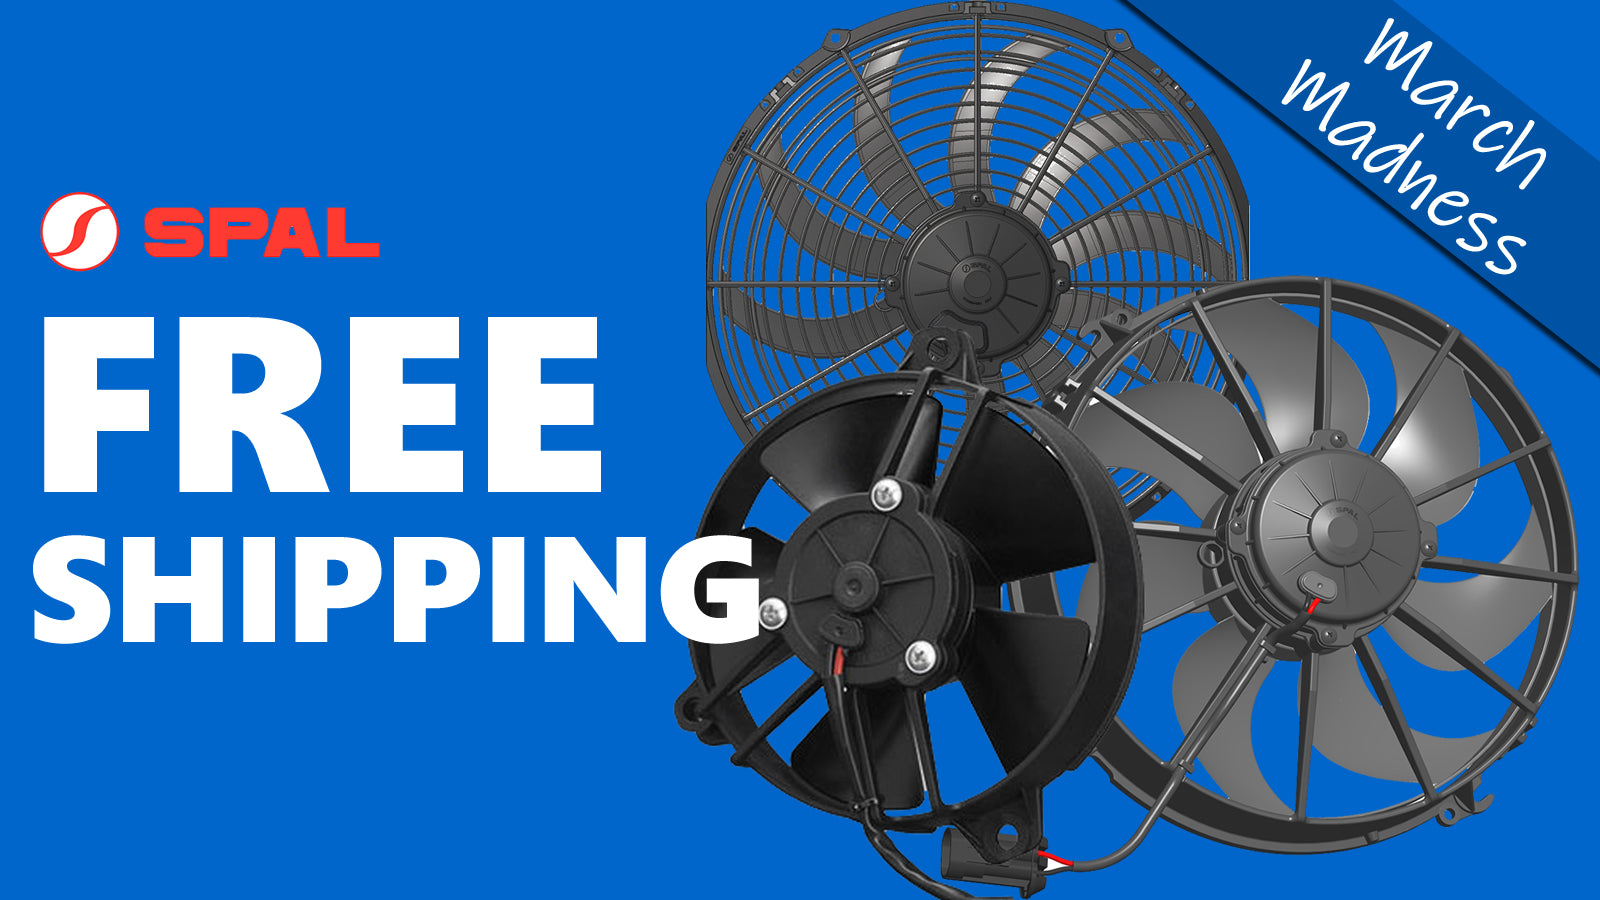 Free Shipping on Single SPAL Fans for the Month of March